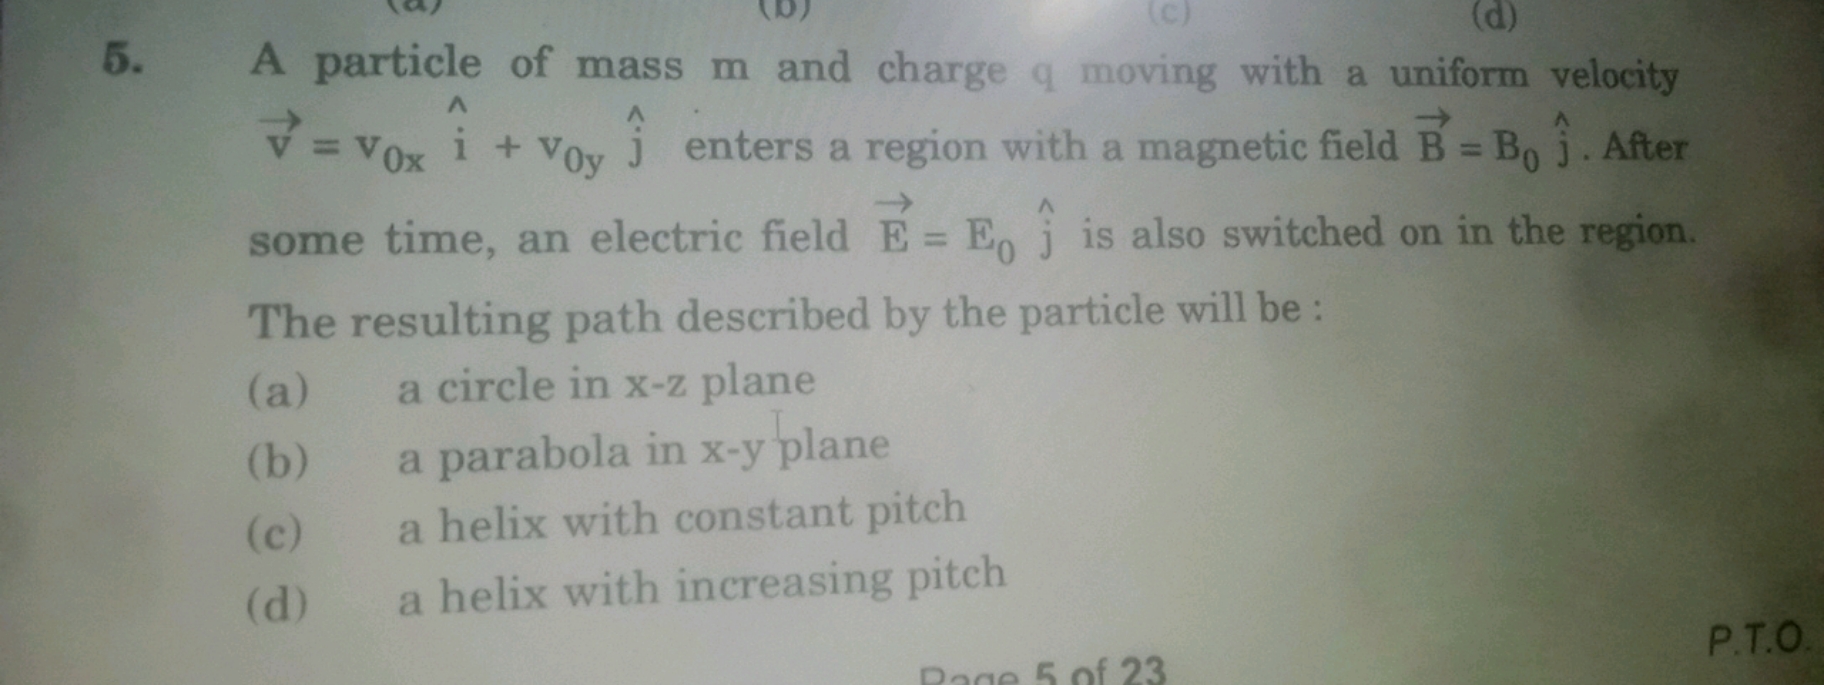 A particle of mass m and charge q moving with a uniform velocity v=v0x